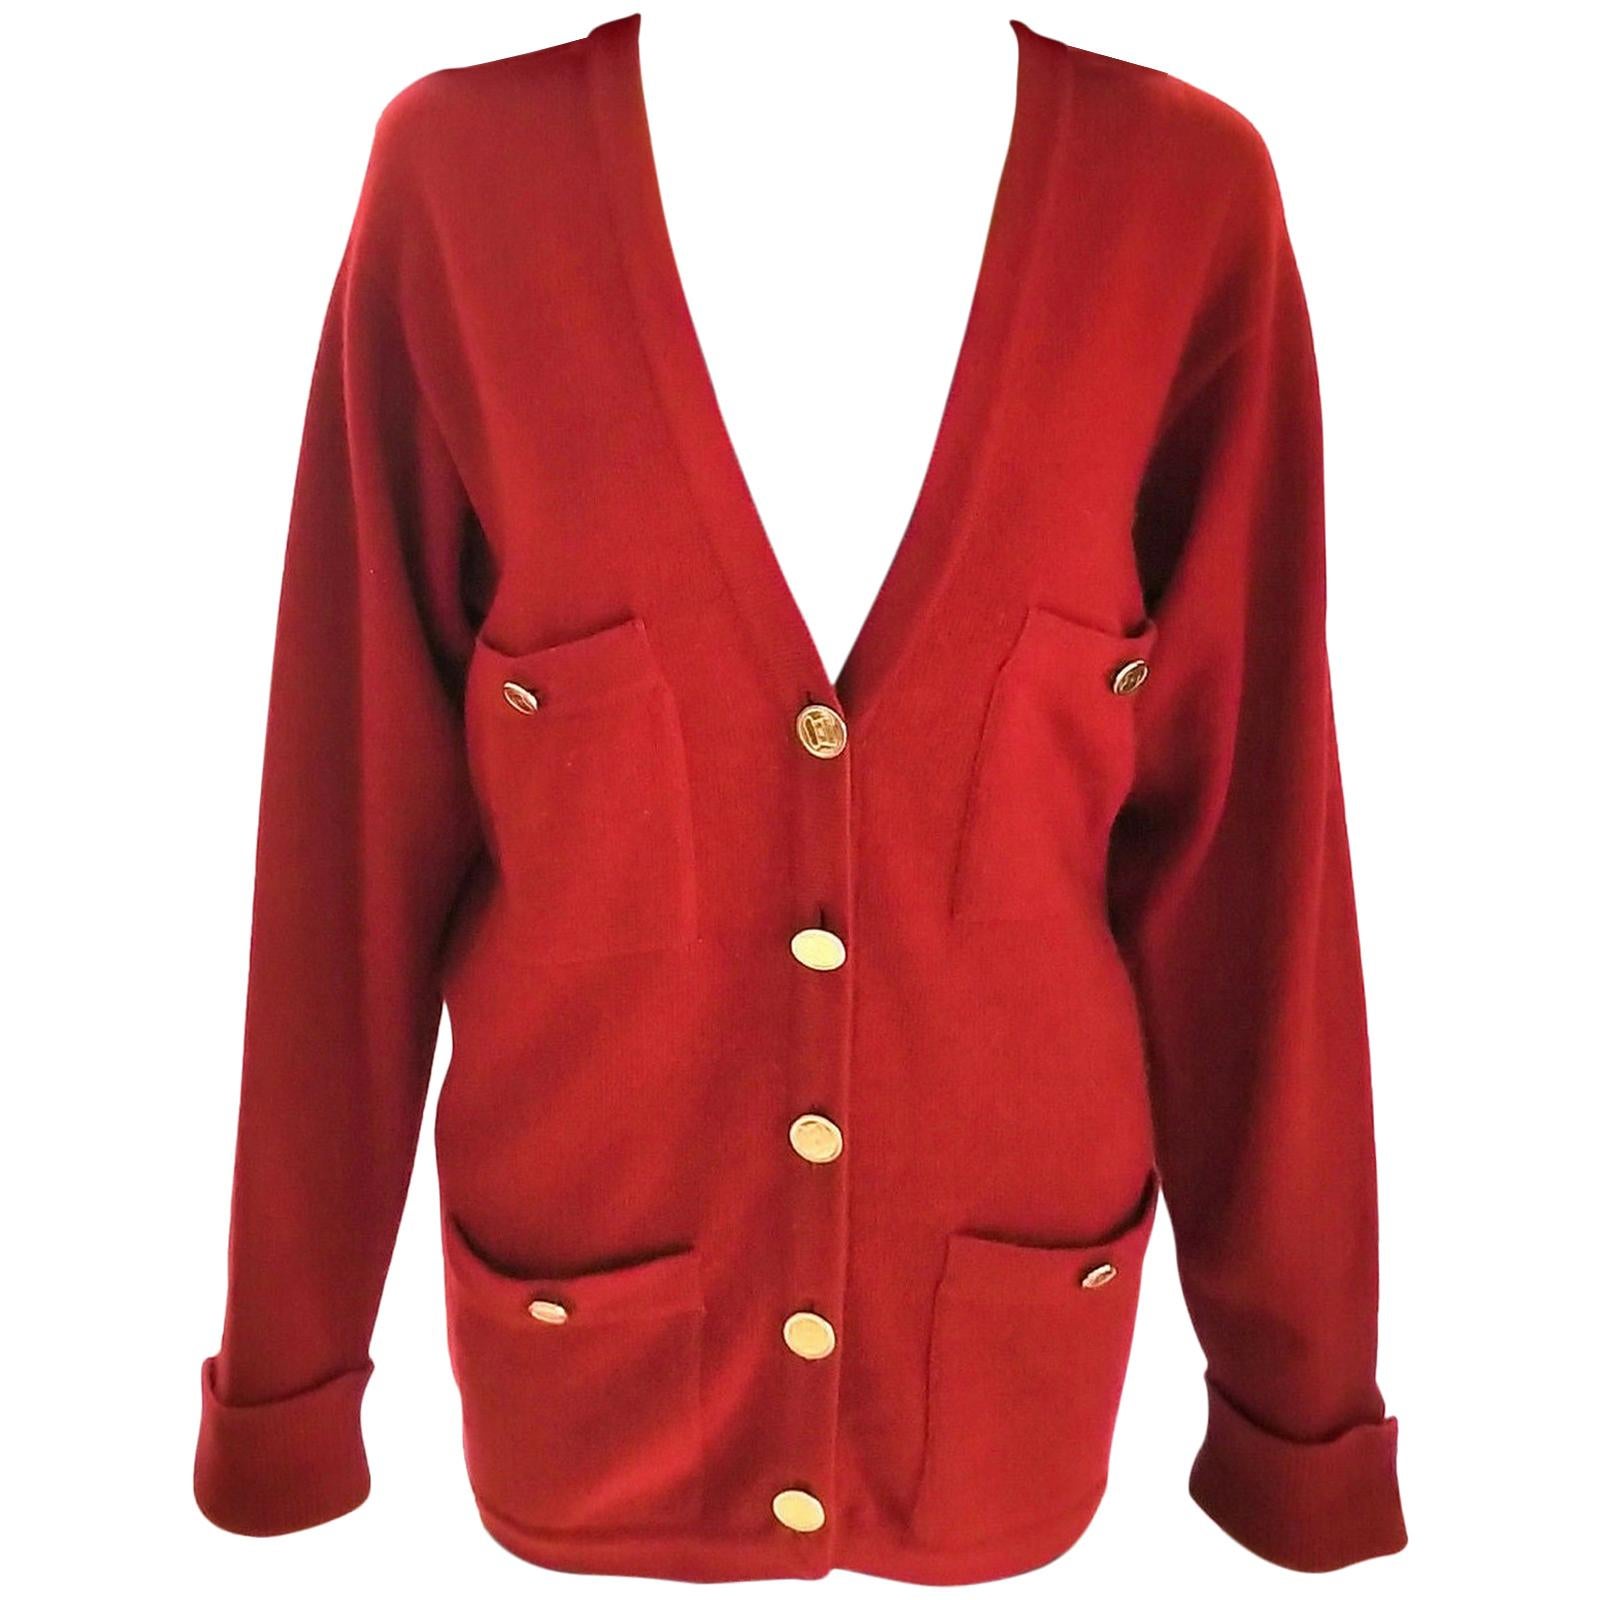 Chanel Red Cashmere Cardigan Sweater Set